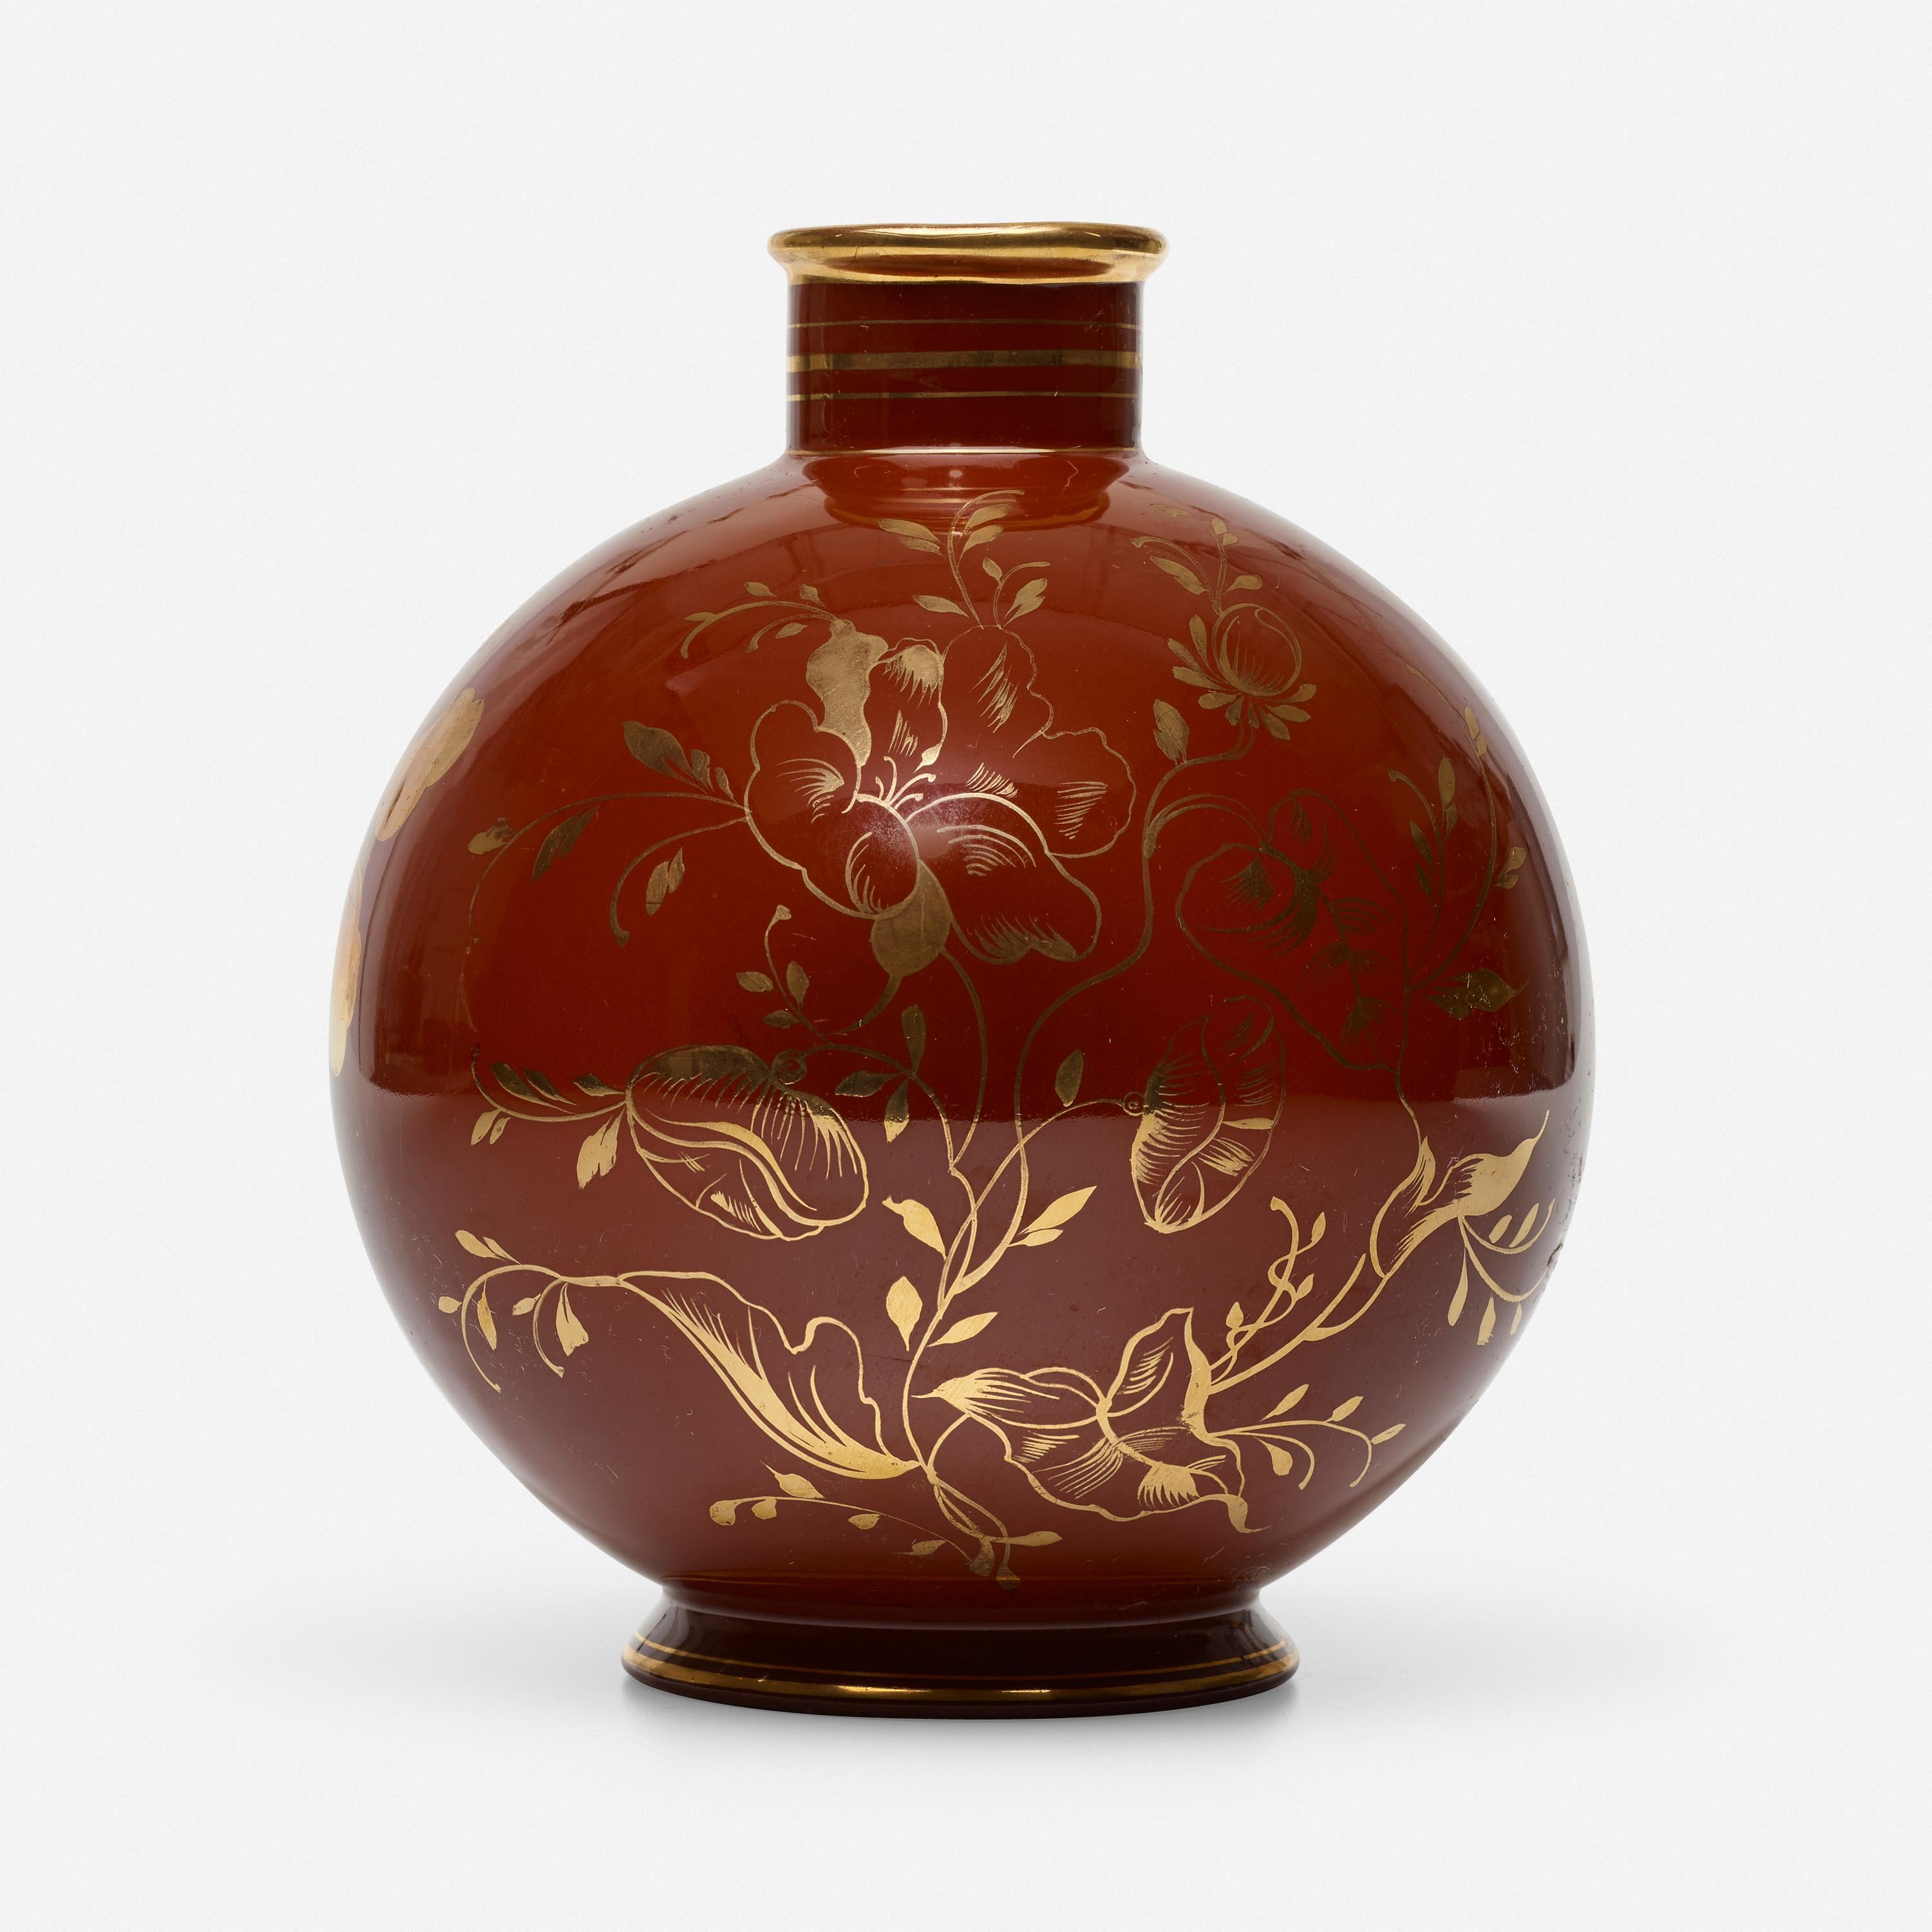 Red vase with with butterflies and floral motifs by Giovanni Gariboldi for Richard Ginori

Acid-stamped manufacturer's mark to underside ‘Richard Ginori M11 491E’.